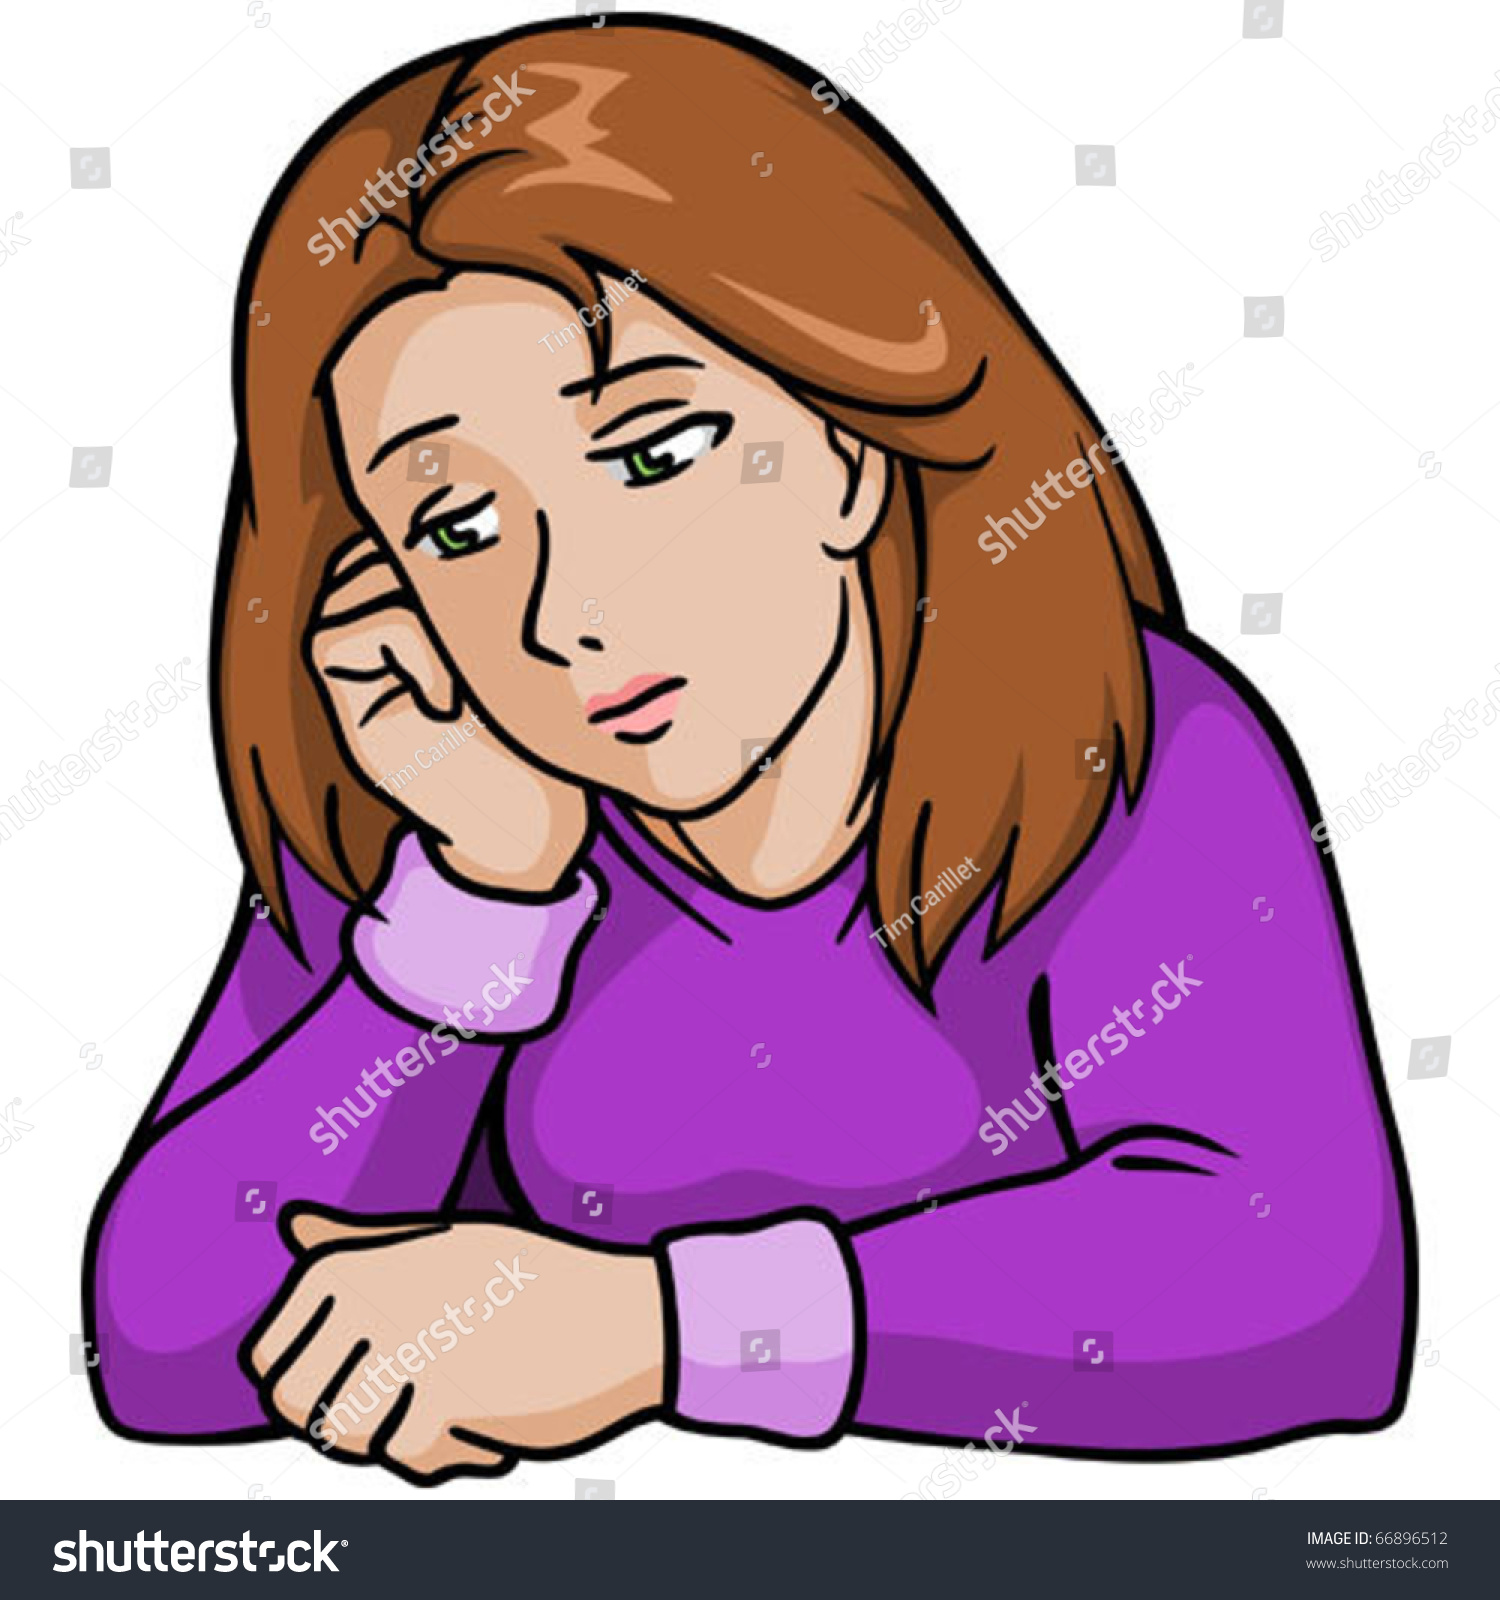 free clipart images depression - photo #49